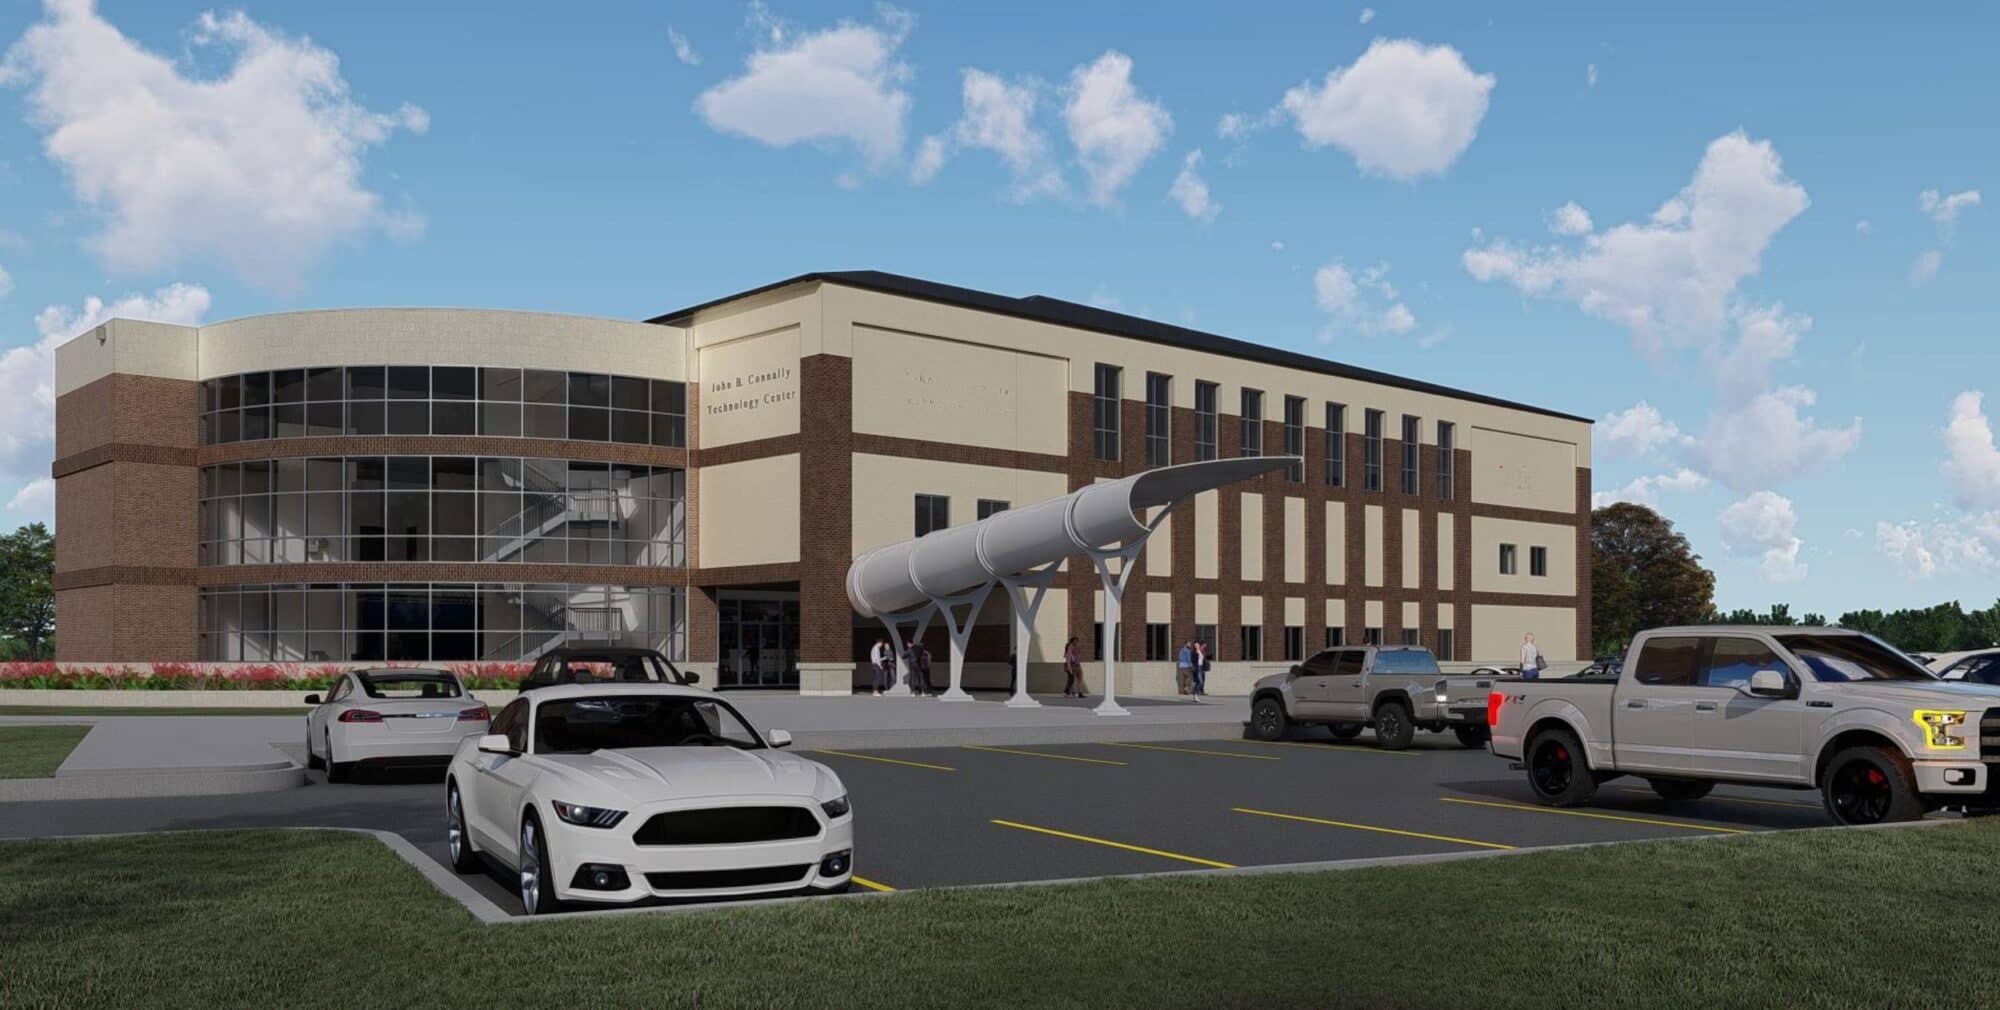 Modern building with exterior rocket display and parking lot.